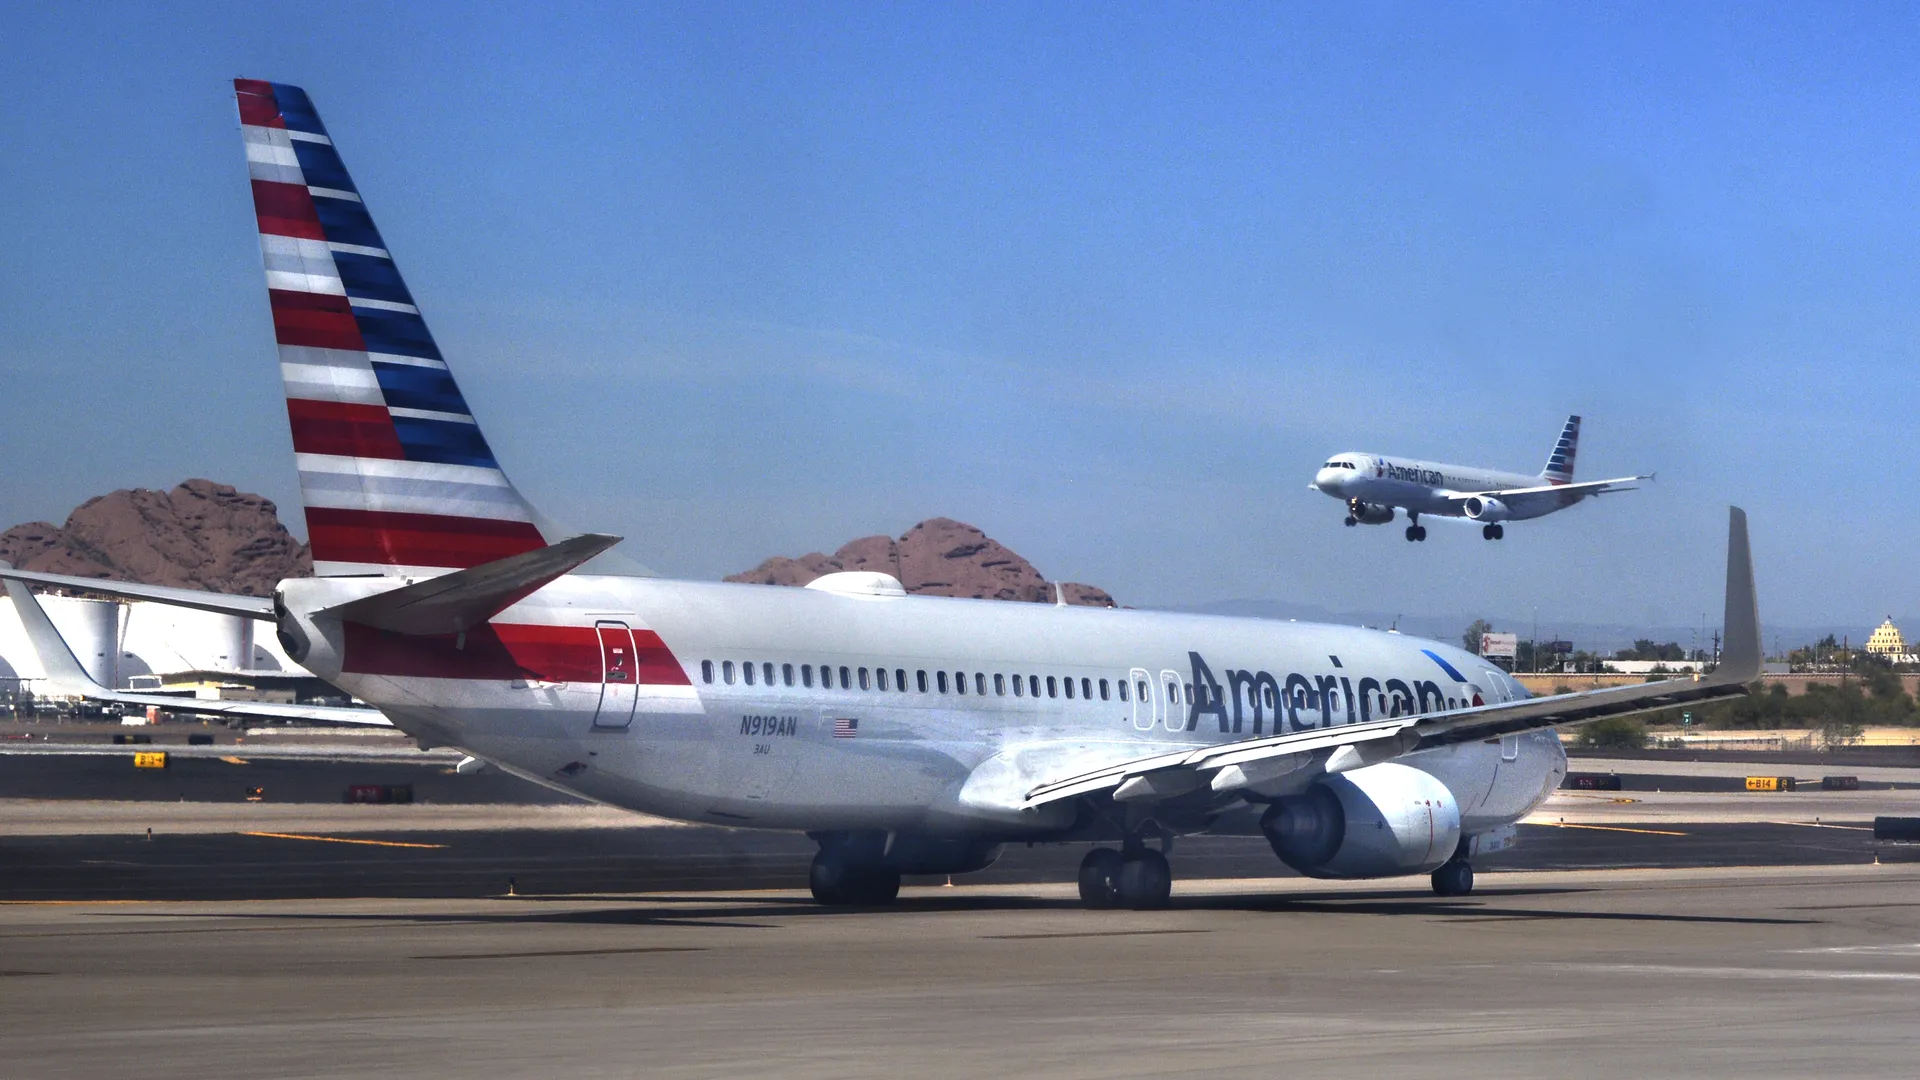 Eight Black Passengers Removed: A Closer Look at American Airlines' Discrimination Claims